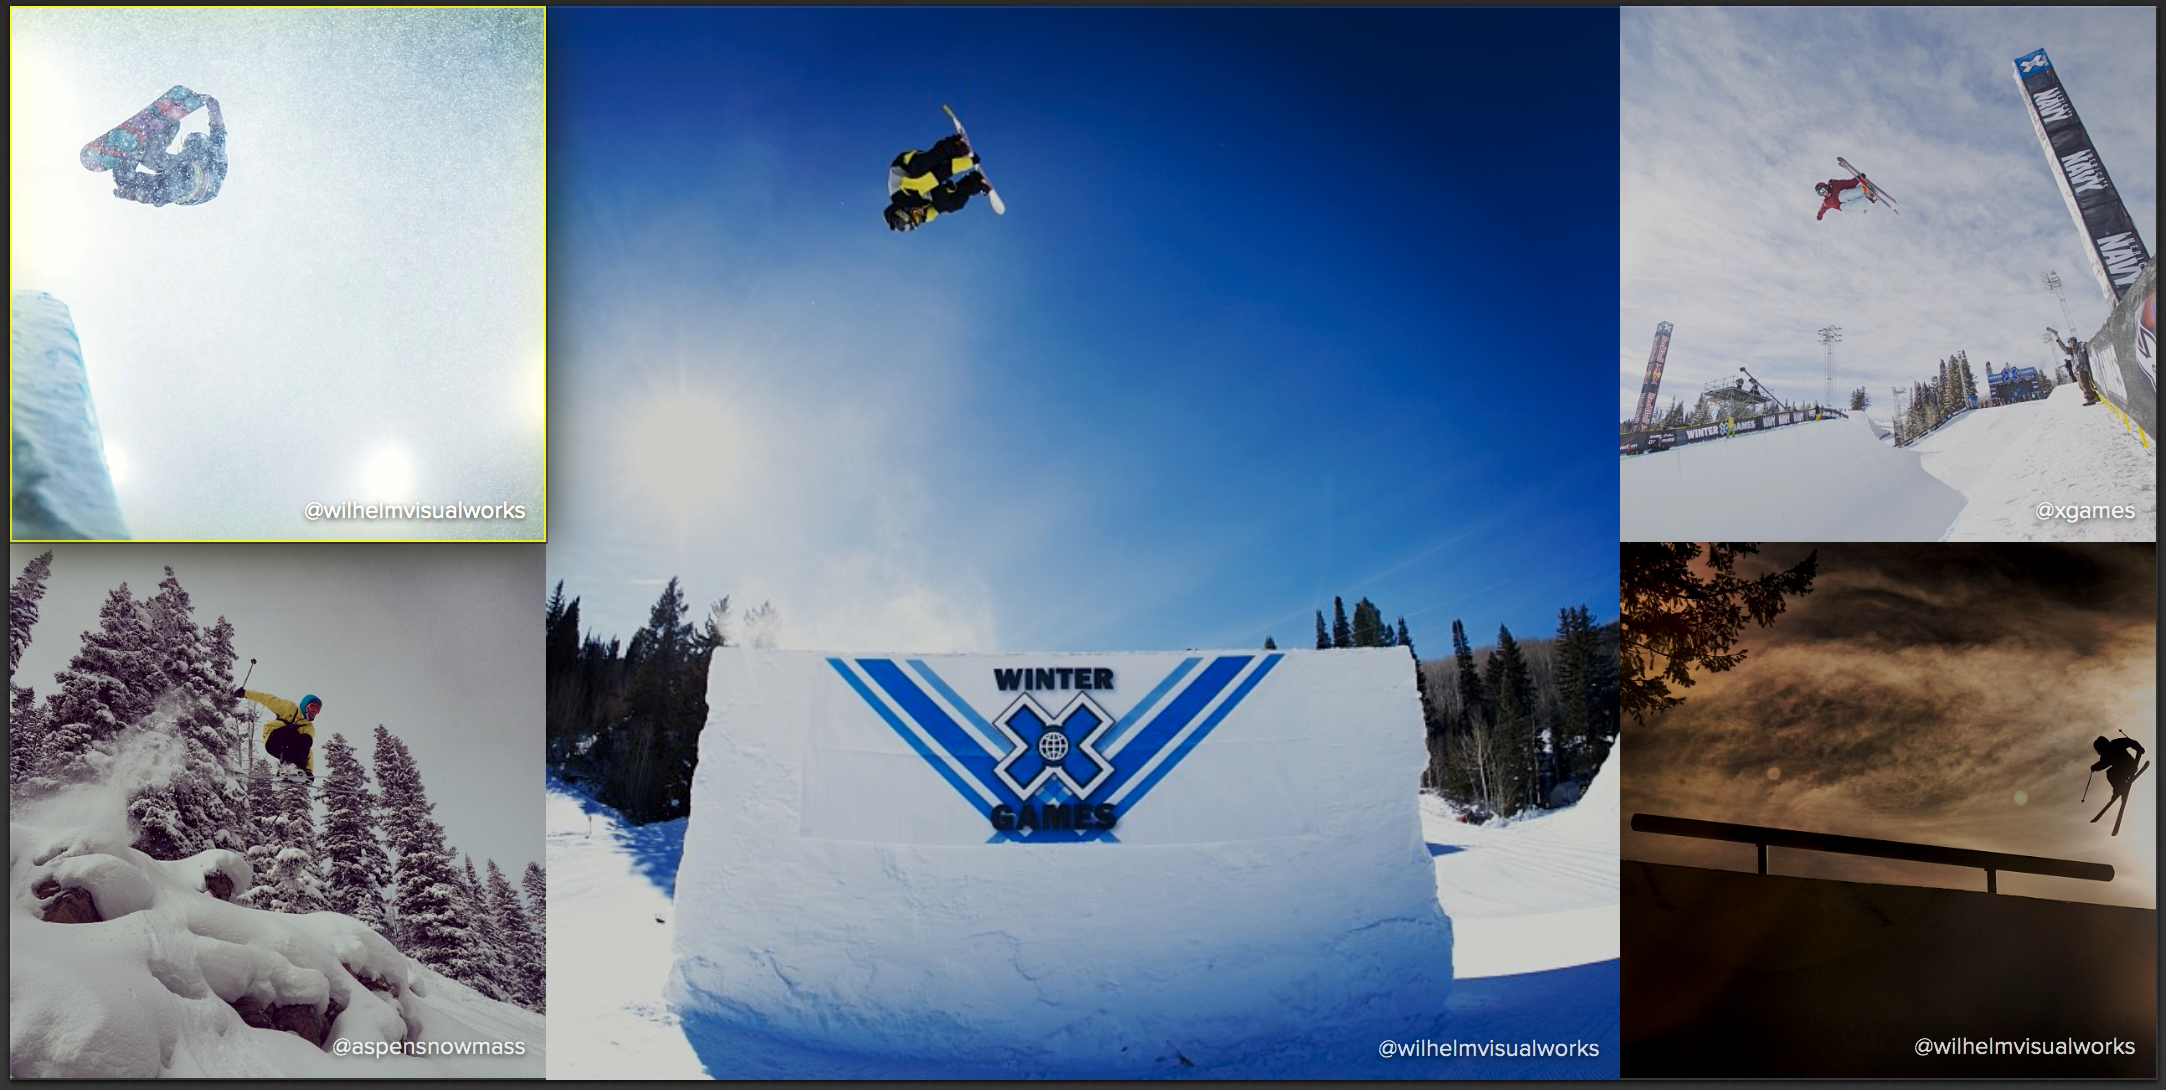 Winter Action Sports Photo Tips for Instagram